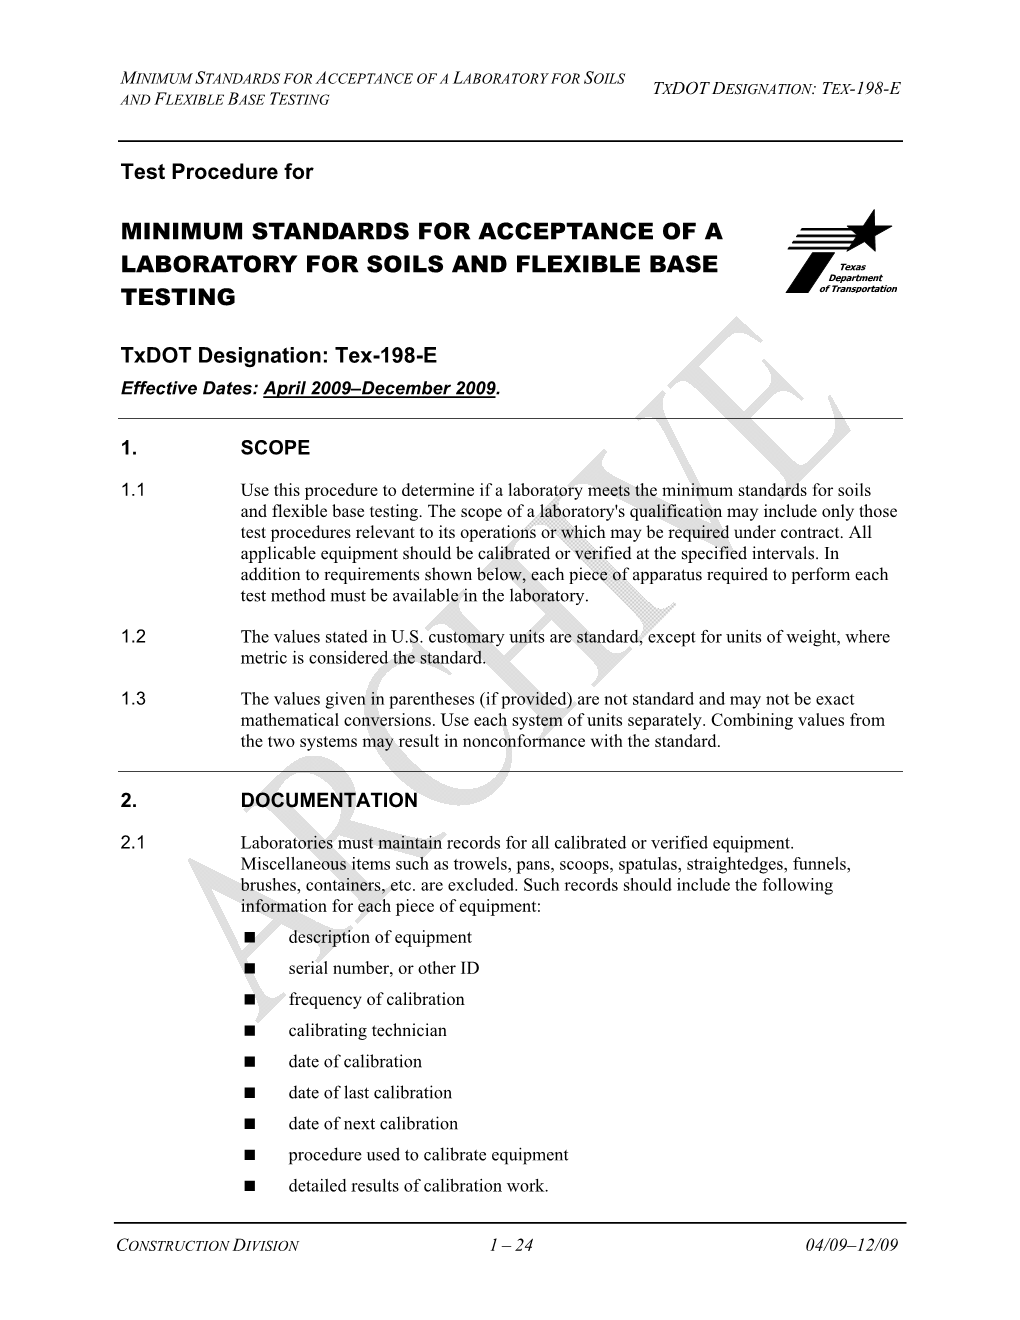 Minimum Standards for Acceptance of a Laboratory for Soils Txdot Designation: Tex-198-E and Flexible Base Testing